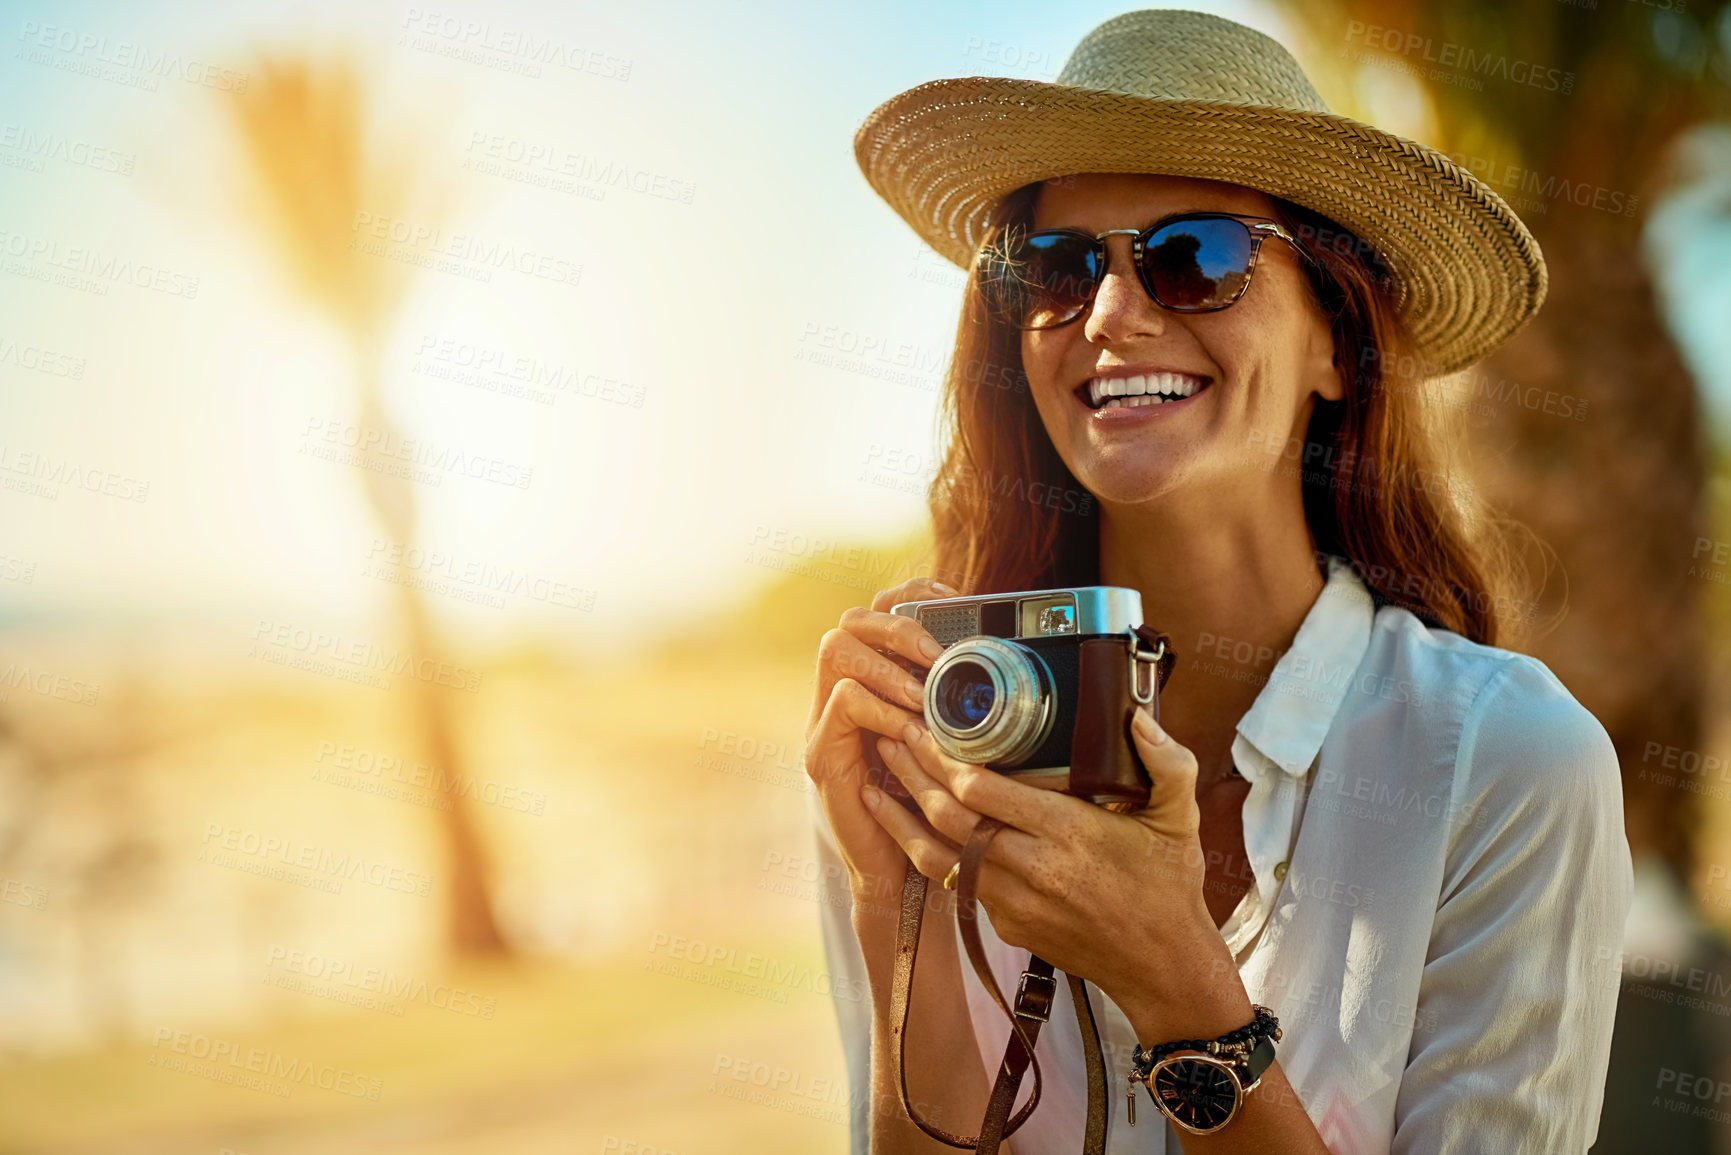 Buy stock photo Shot of an attractive young woman using a camera on a summer’s day outdoors